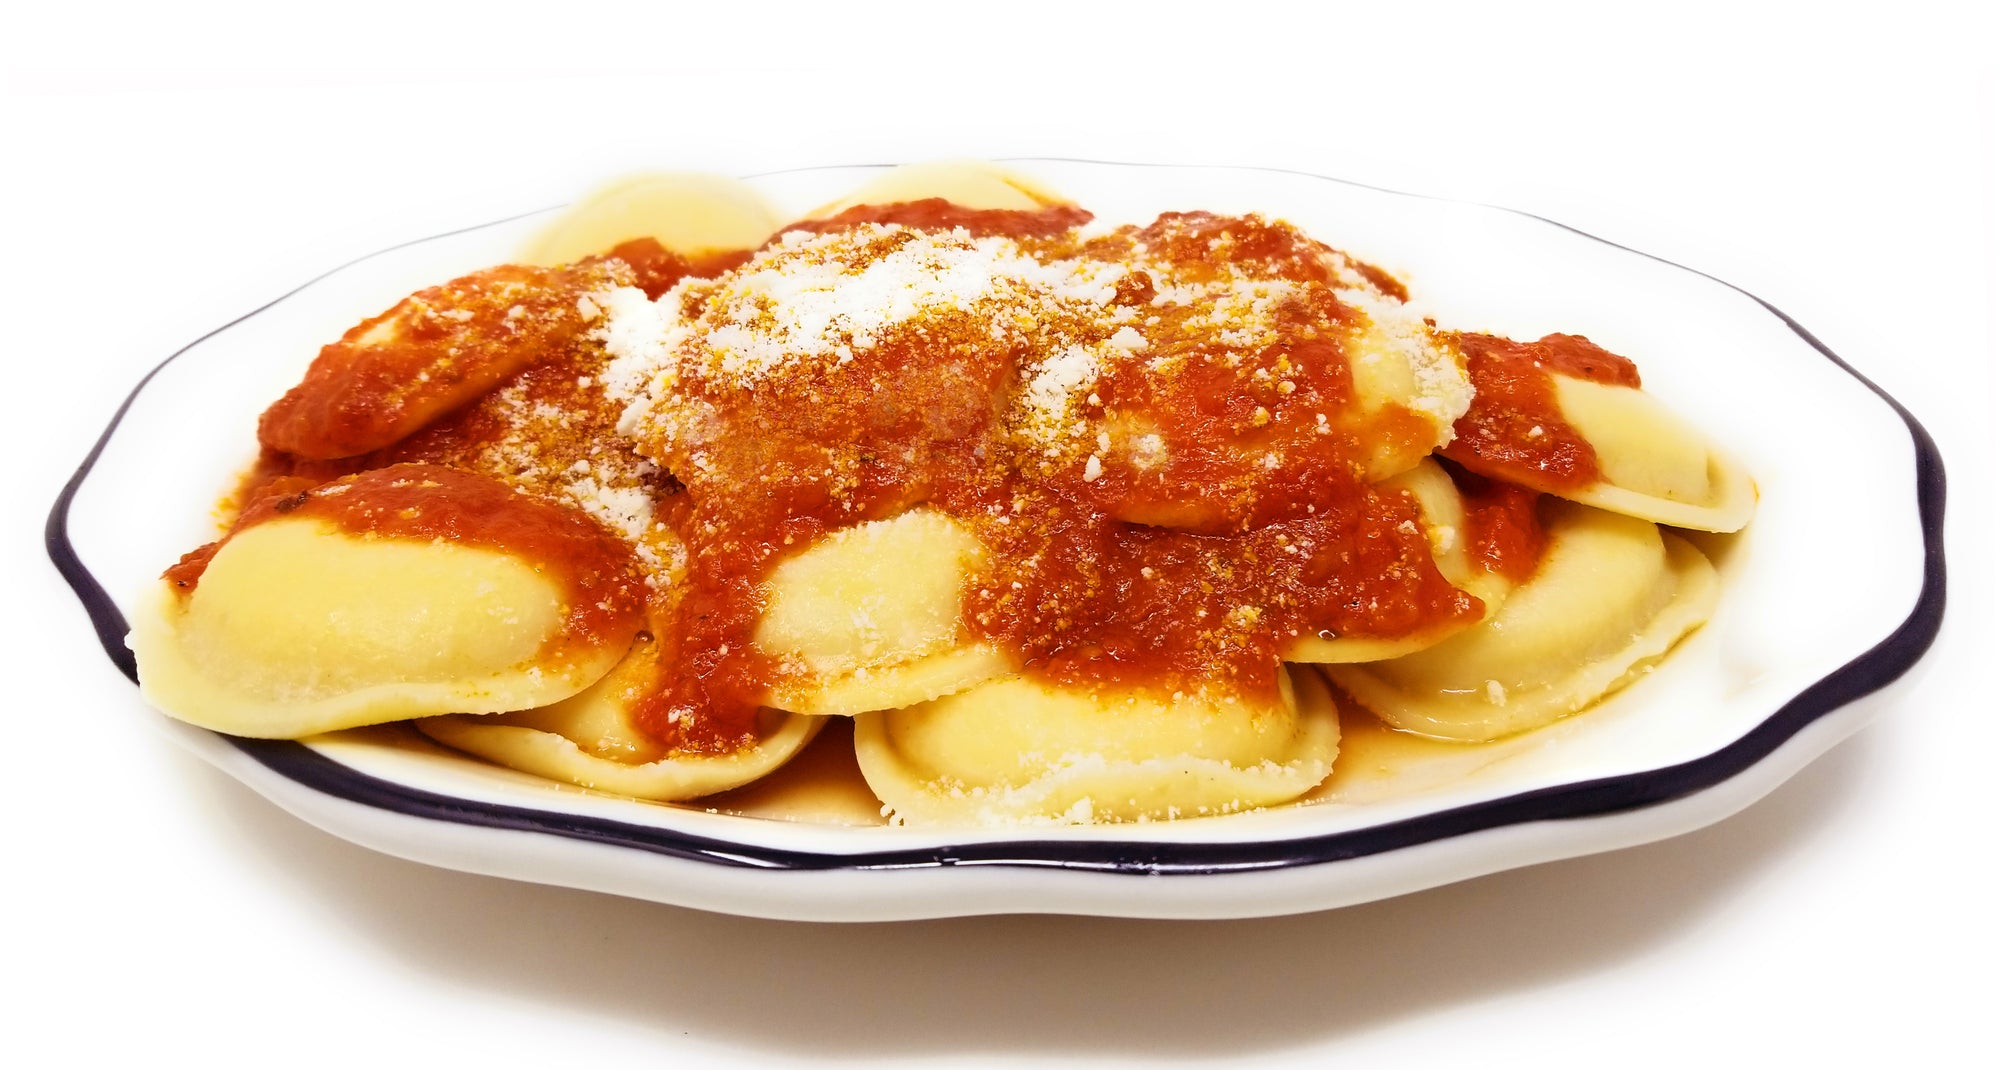 Fresh Ravioli 6 Boxes Large Round Cheese - Made in NYC by Frank and Sal Italian Market - 72 Count Overnight Shipping